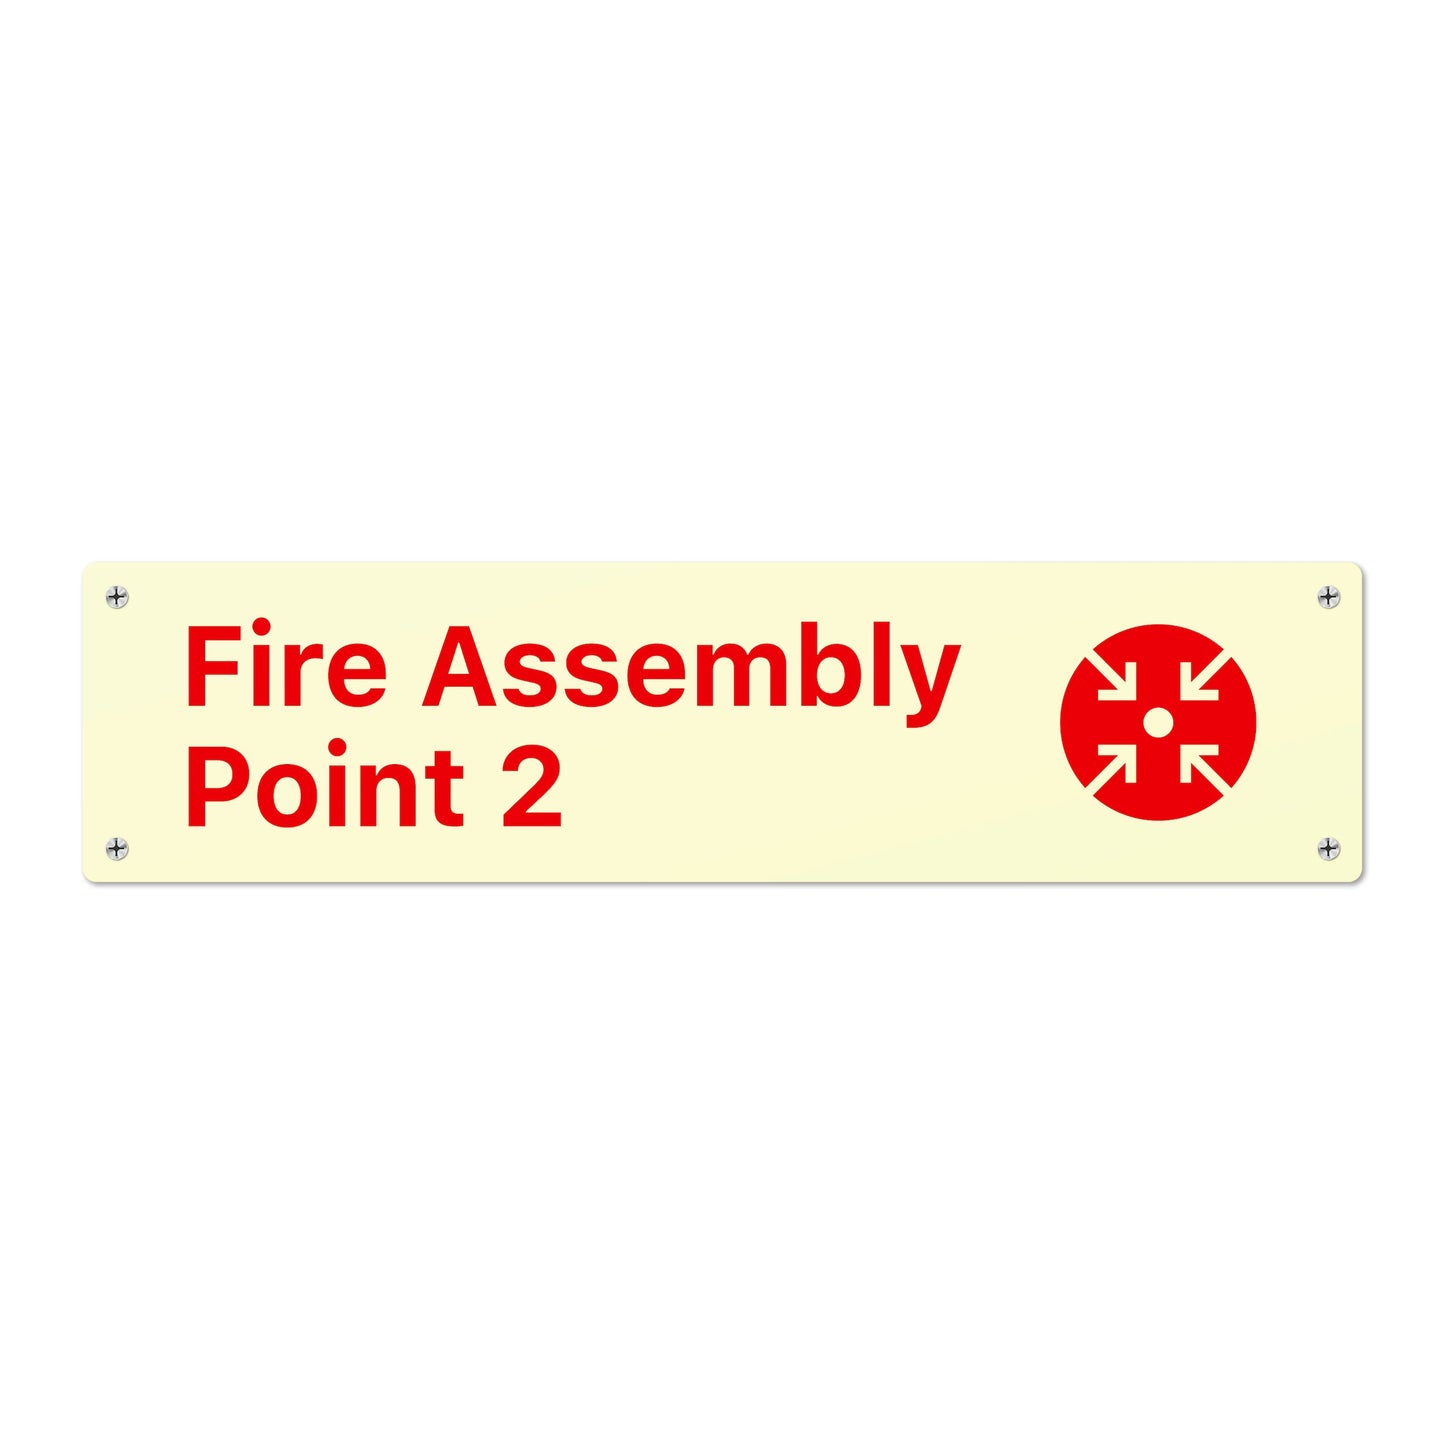 Fire Assembly Point 2